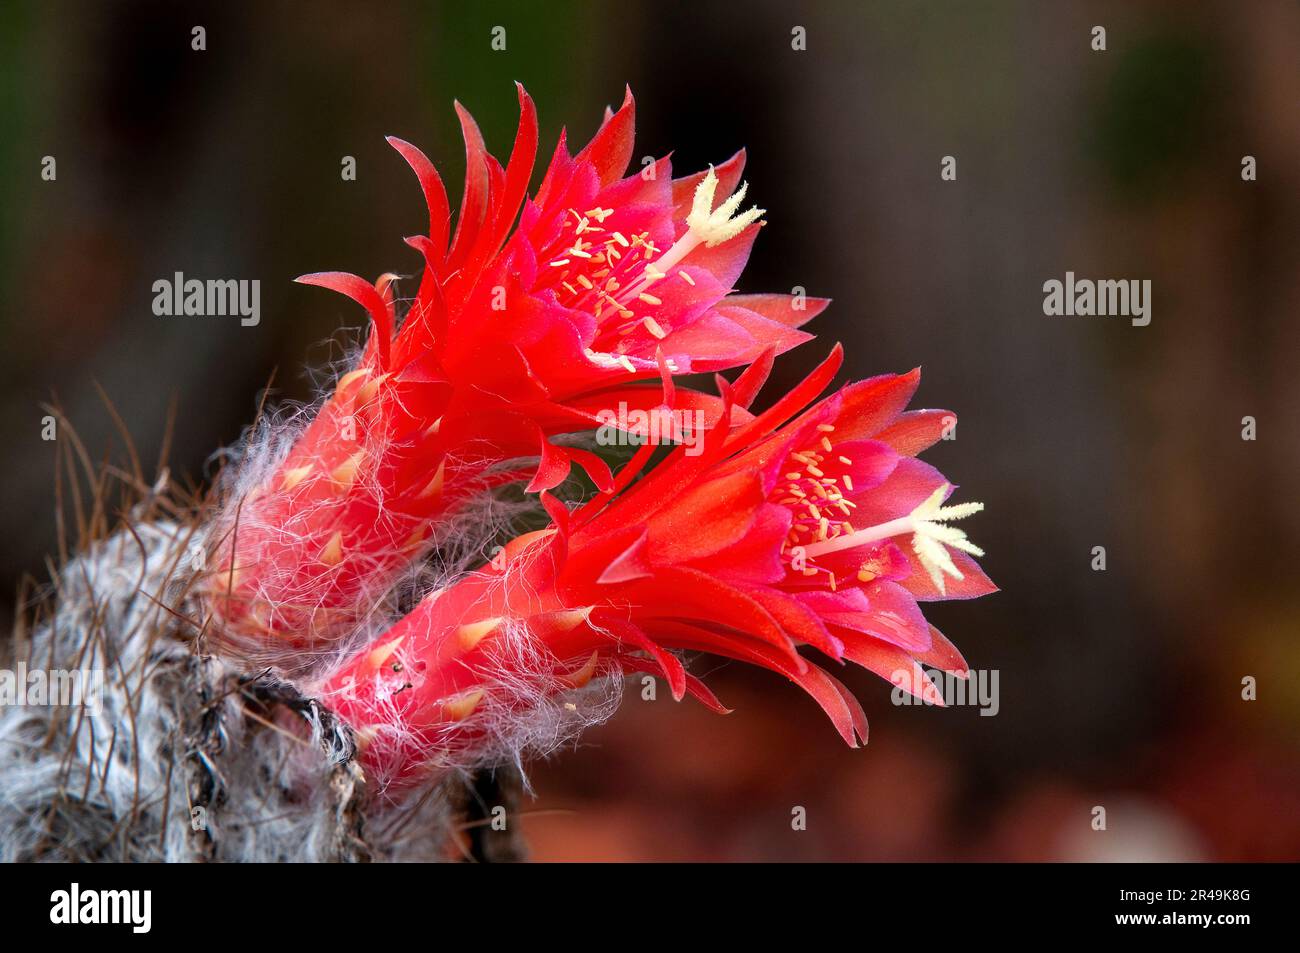 Sydney Australia, close up of red flowers of touch cactus in a desert garden Stock Photo